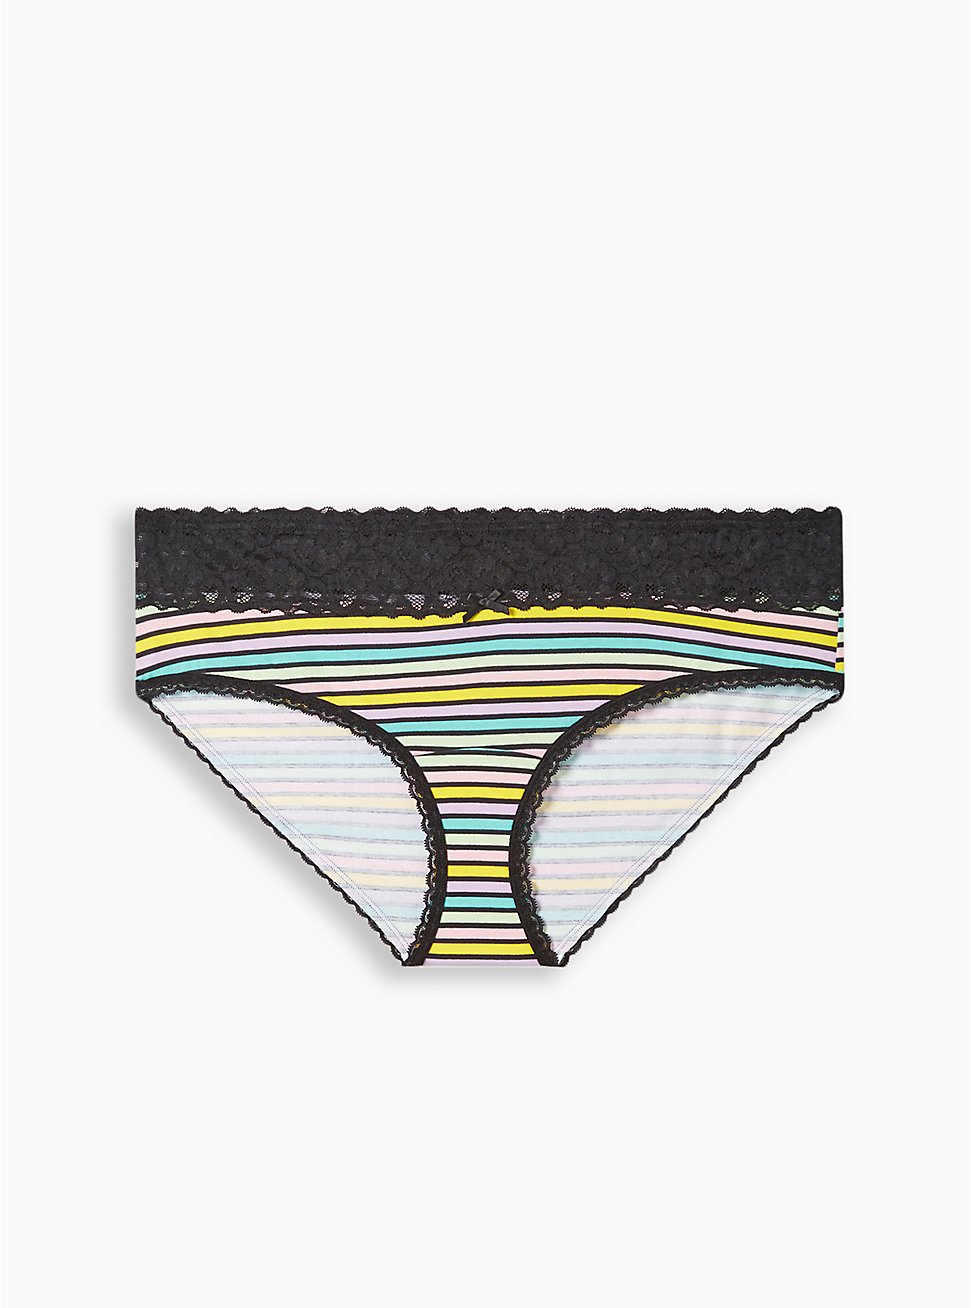 Cotton Mid-Rise Hipster Lace Trim Panty, RACING STRIPE, hi-res